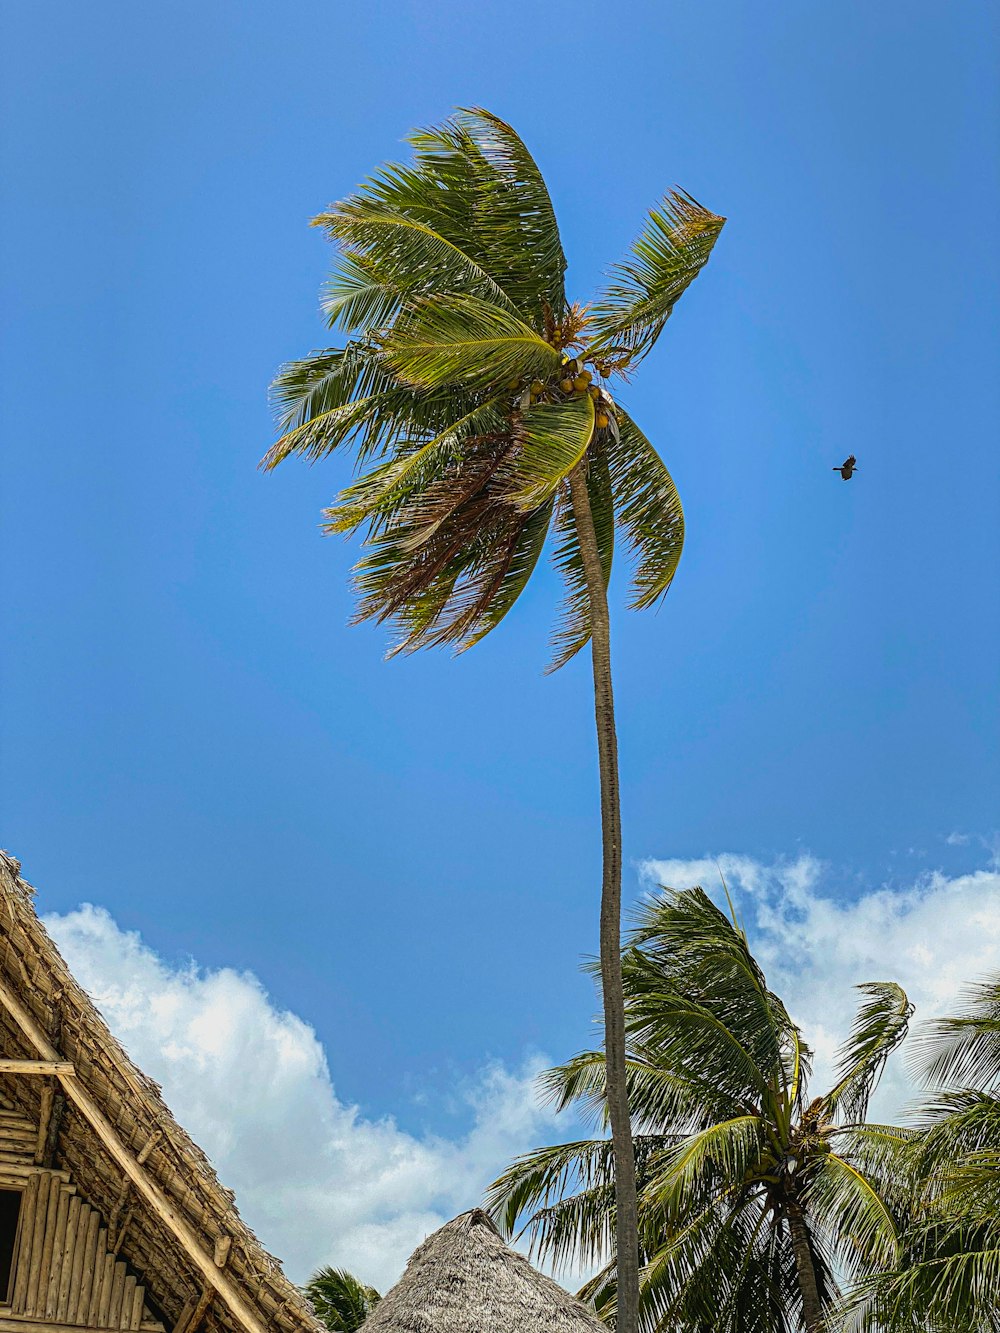 low angle photography of palm tree under blue sky during daytime